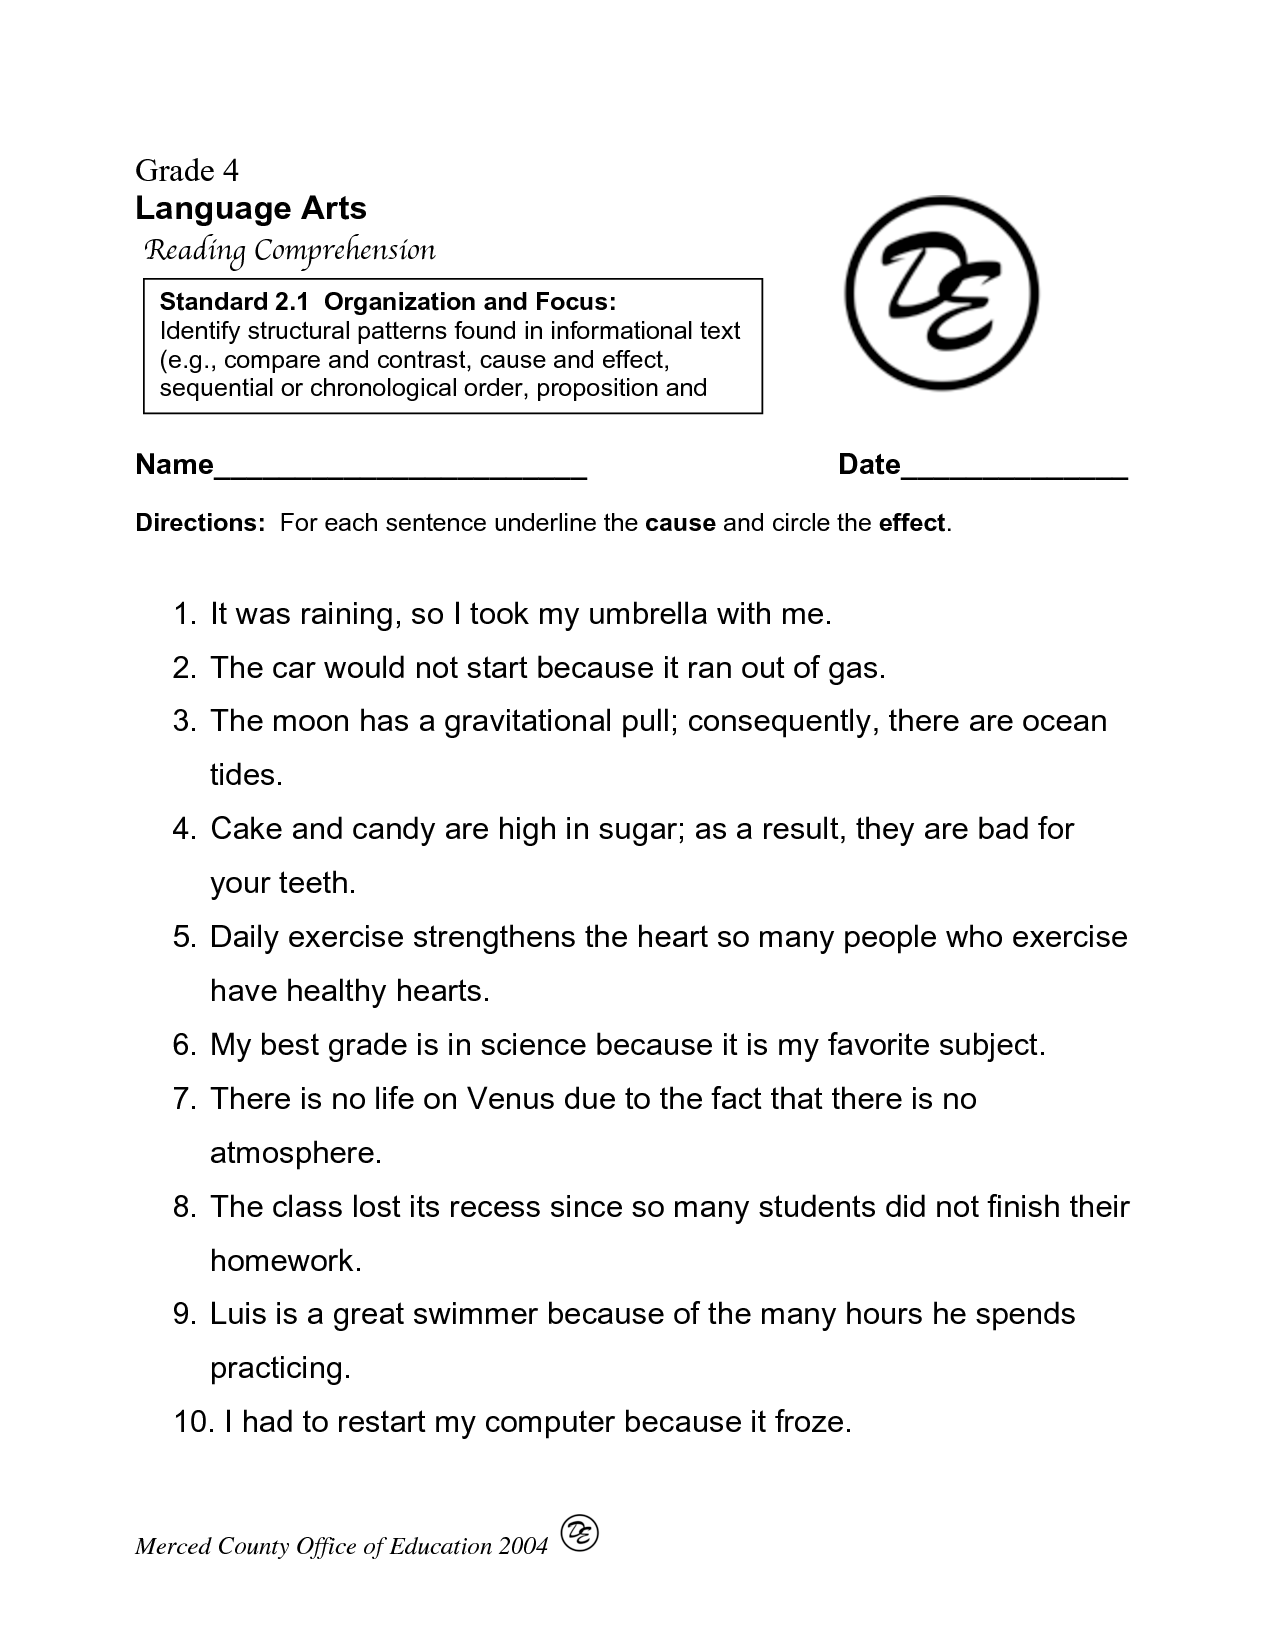 15-best-images-of-cause-effect-reading-comprehension-worksheets-cause-and-effect-worksheets